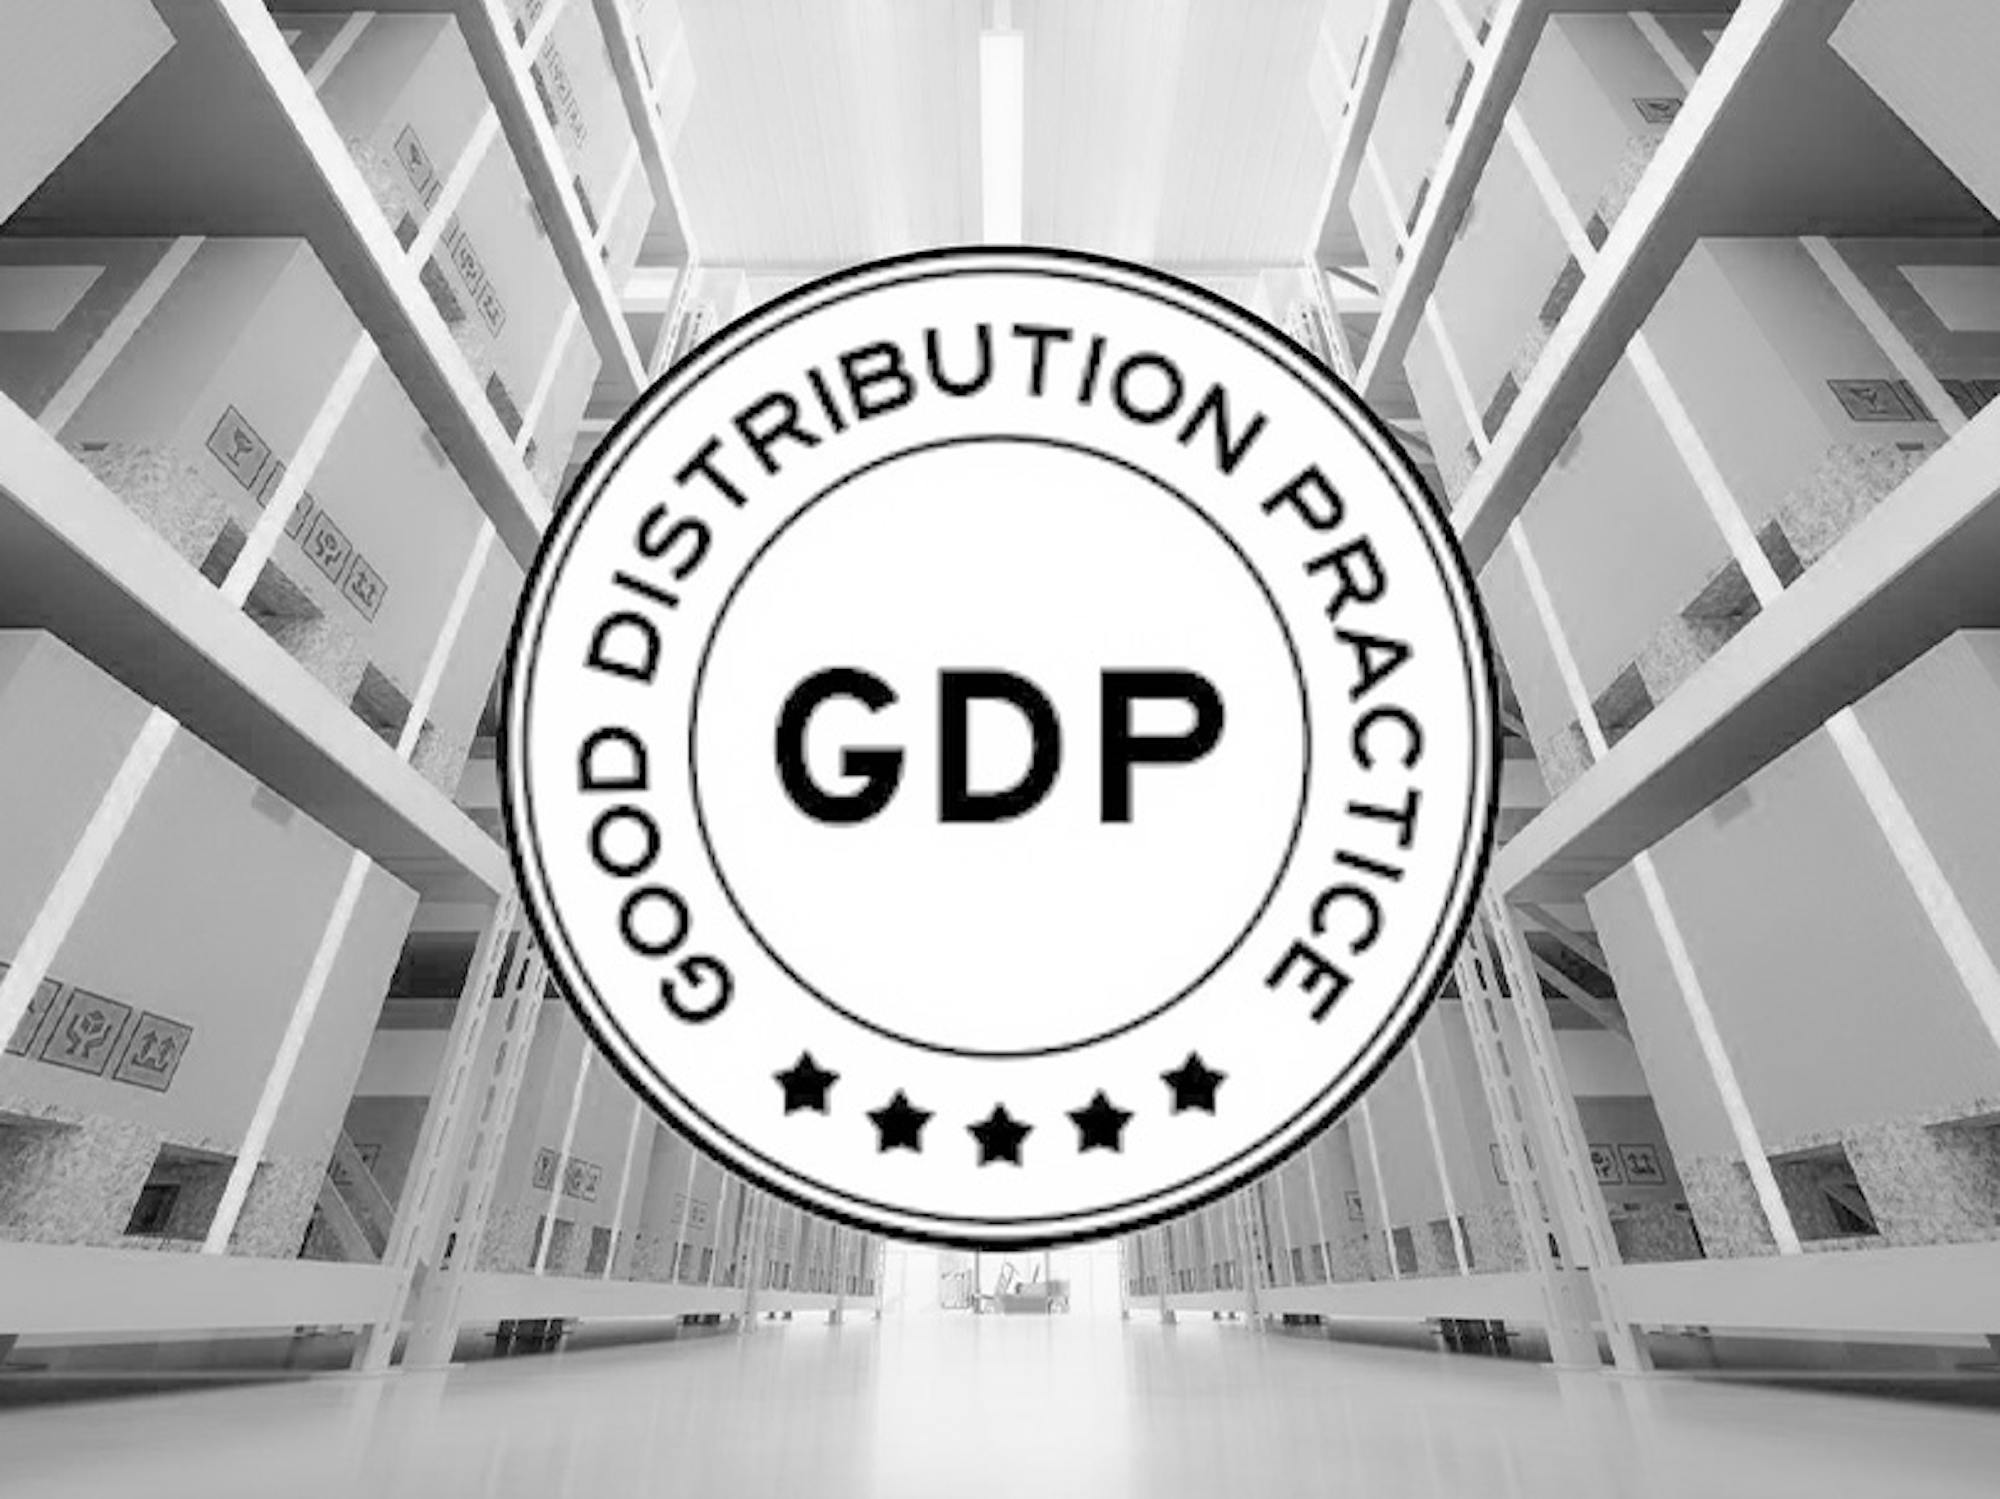 a warehouse and gdp logo